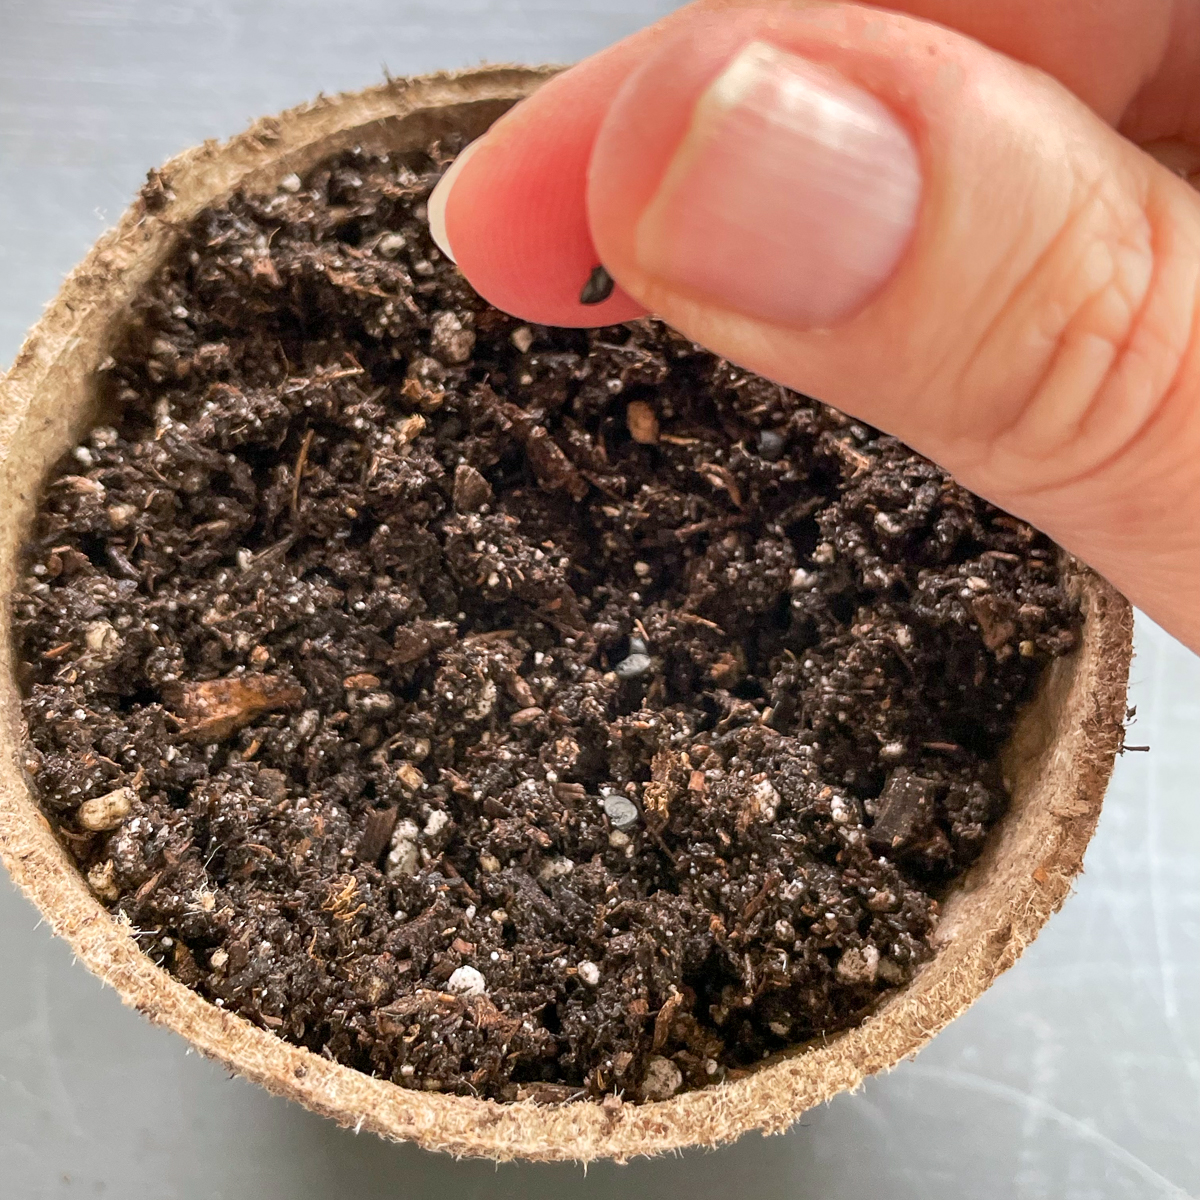 planting green onion seeds in a peat pot